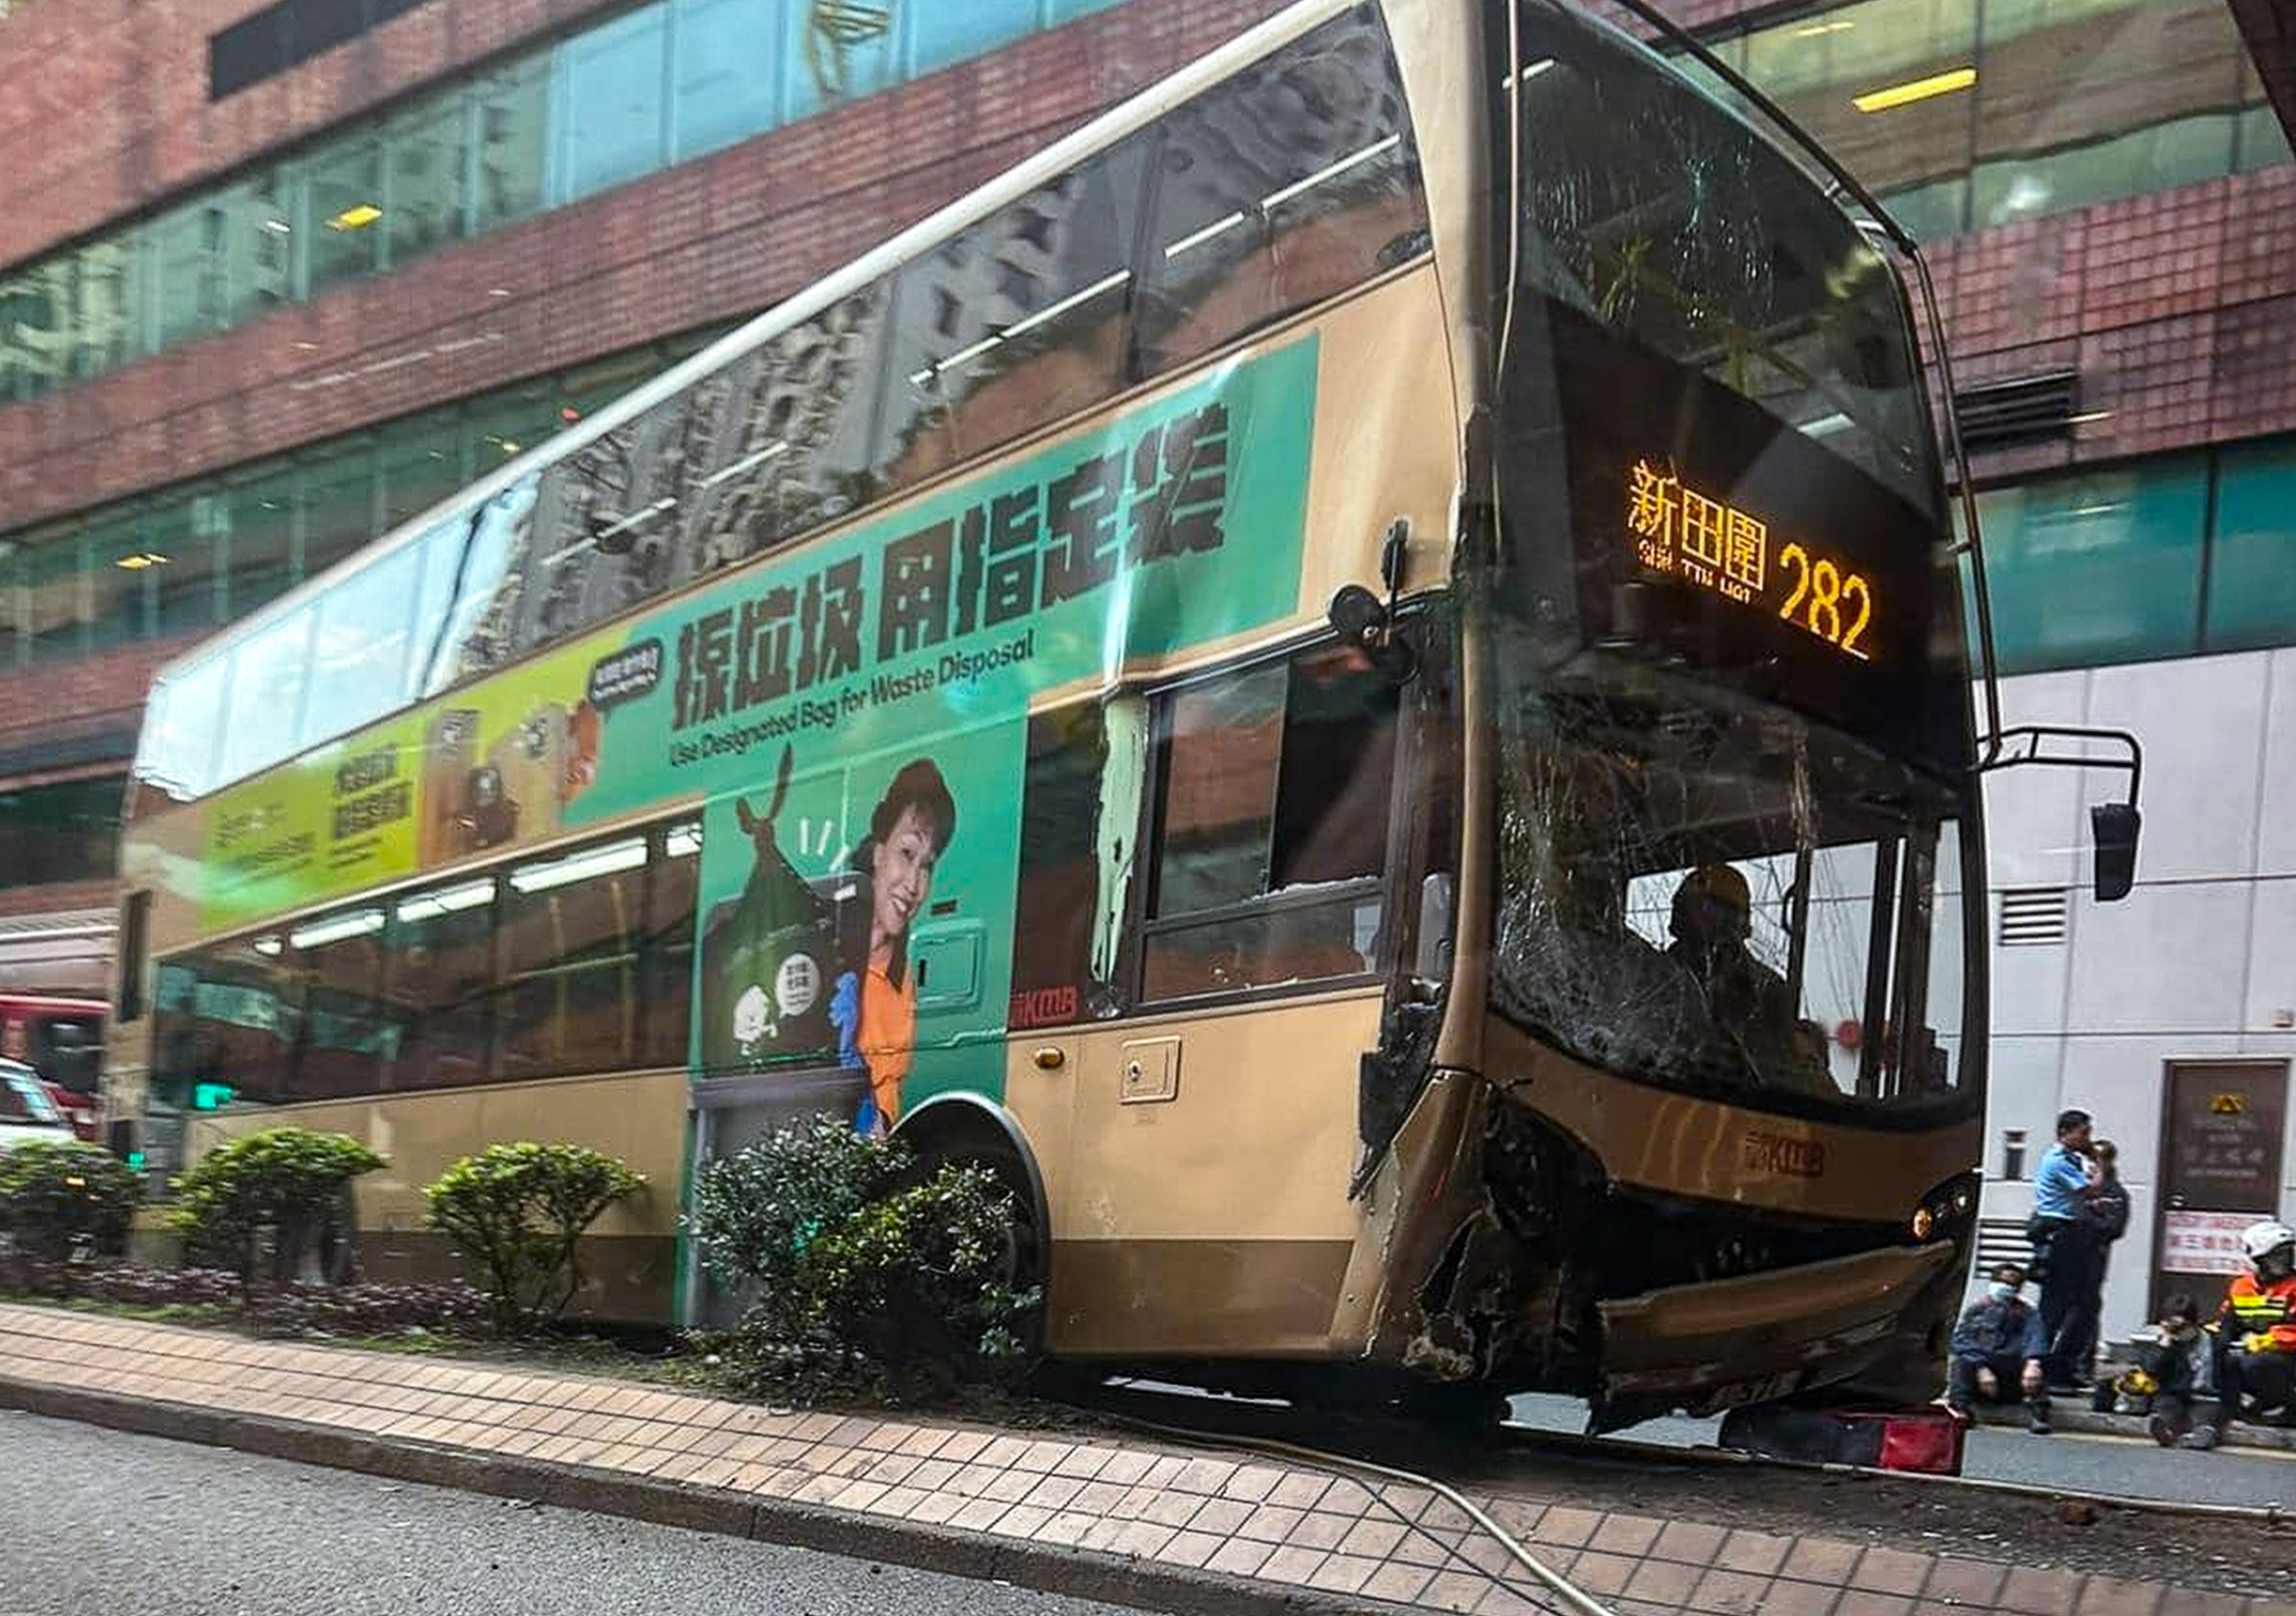 The KMB bus on the kerb after the crash. It was operating route 282, a circular service connecting Sha Tin’s New Town Plaza with Sun Tin Wai. Photo: Facebook/Akakin Li